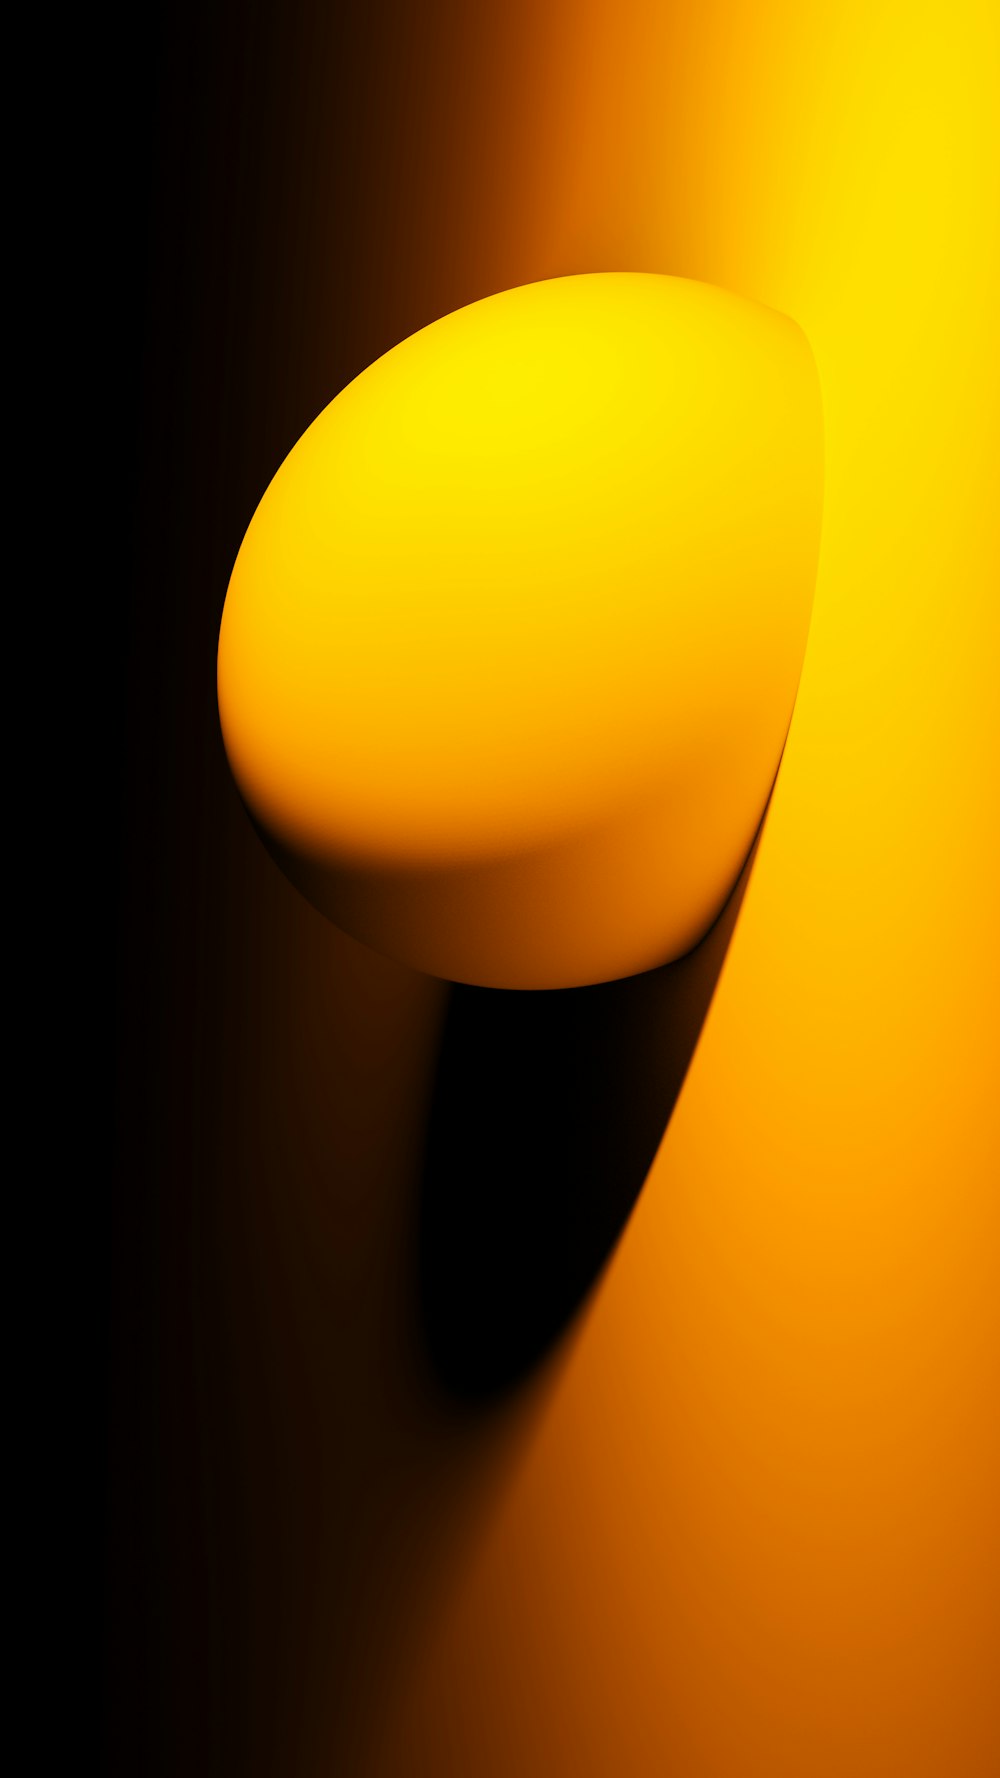 a close up of a yellow object on a black background